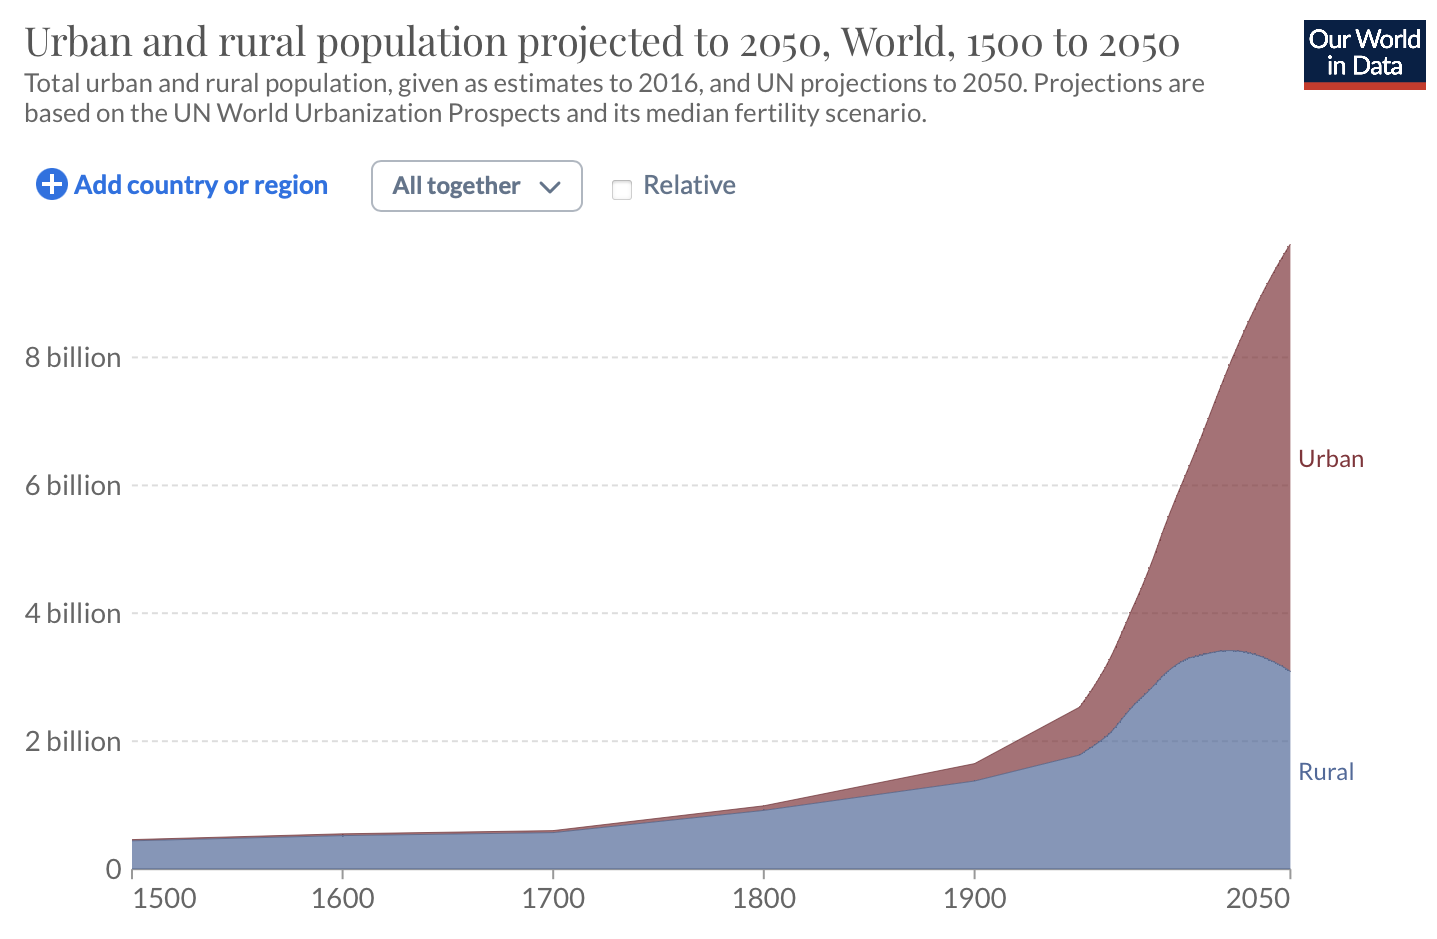 A graph that shows the drastic urbanization expected to occur by 2050.